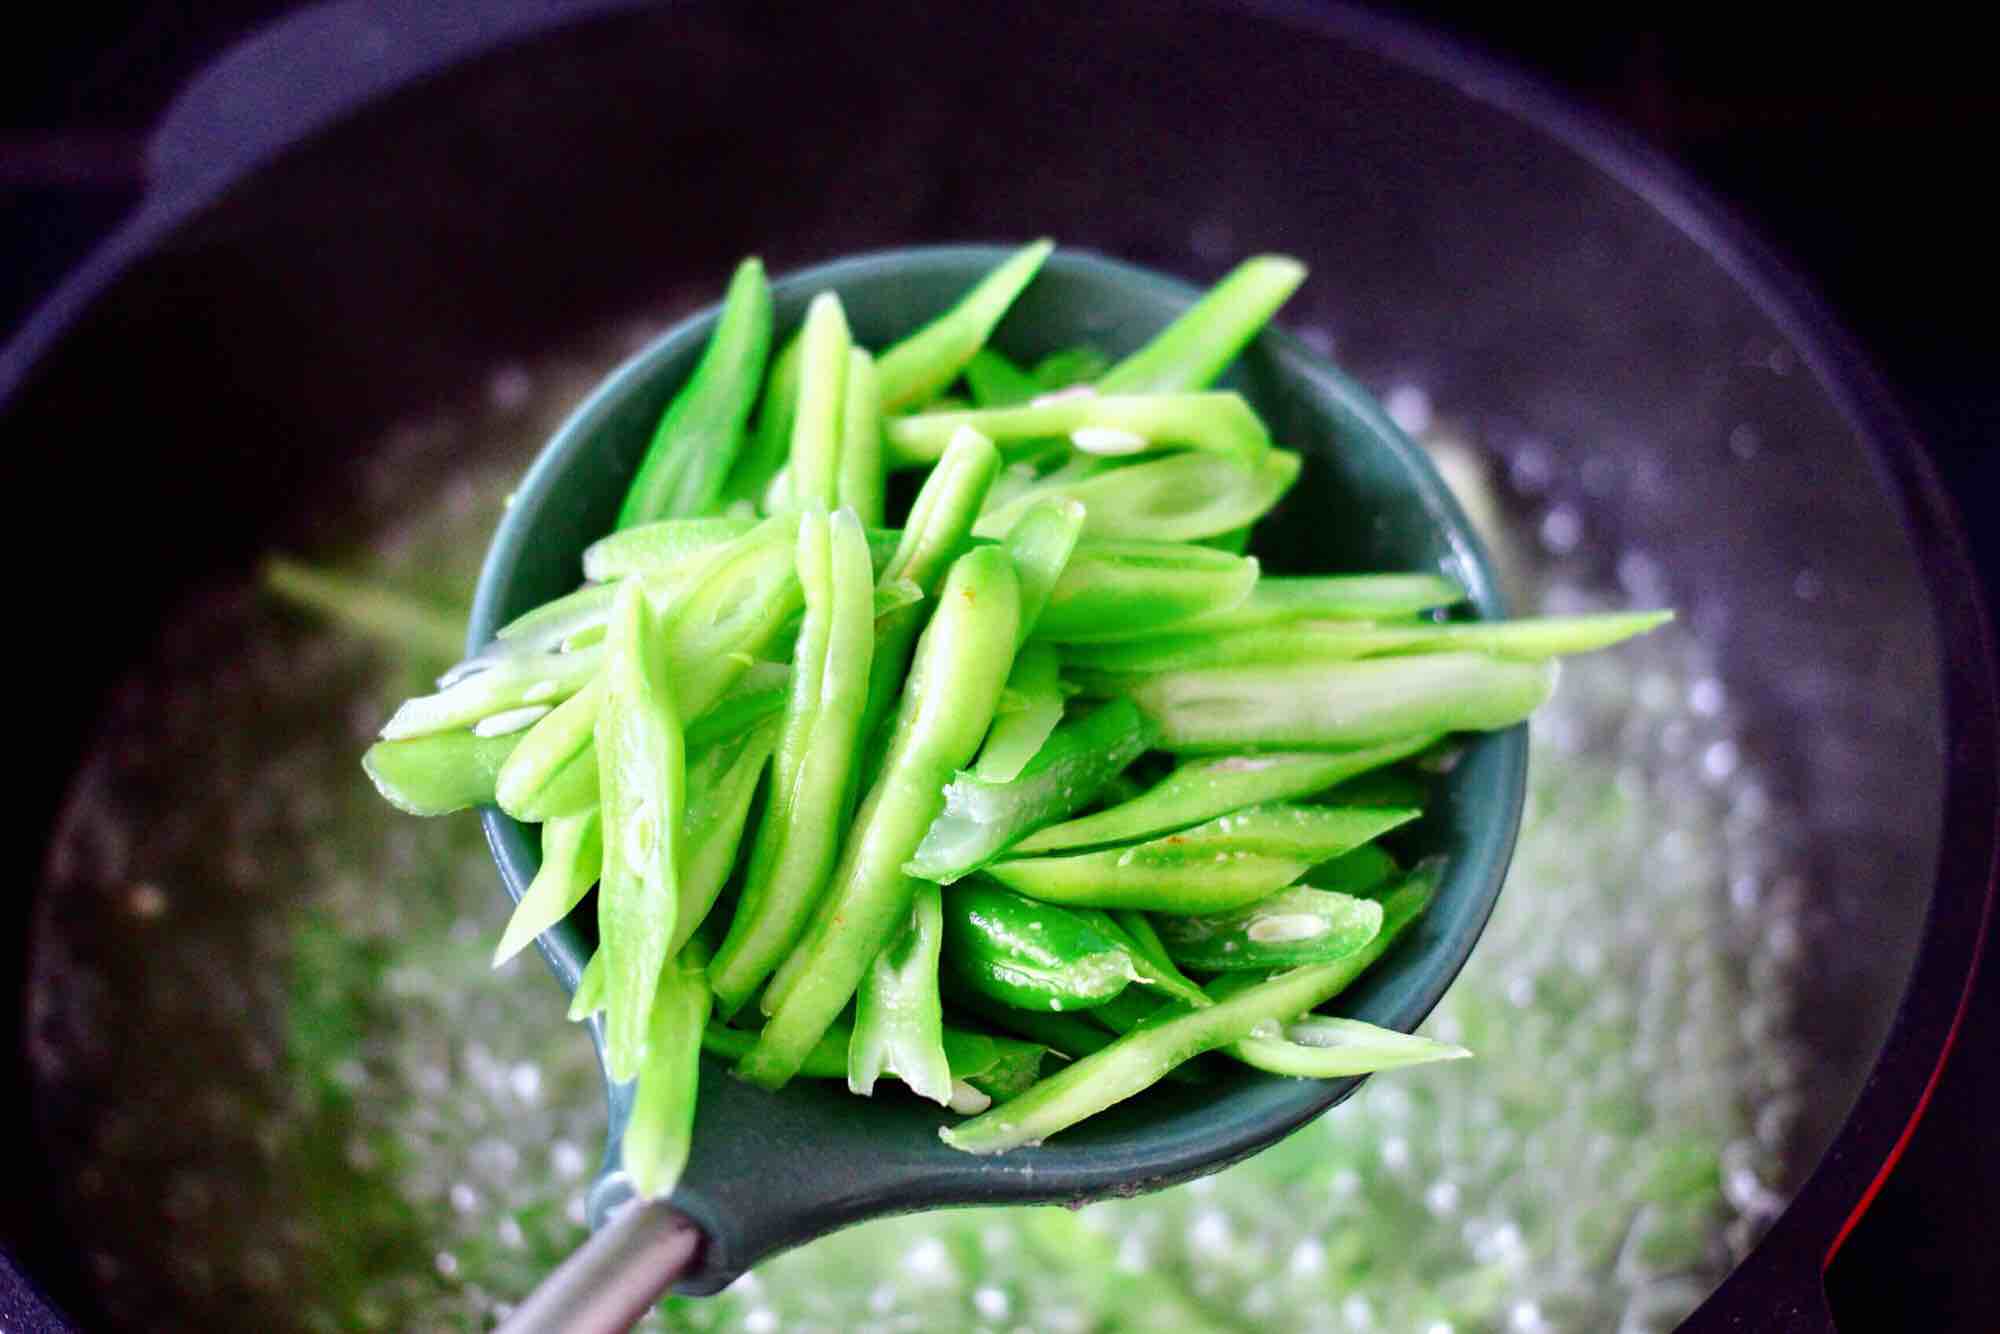 Stir-fried Scallop Meat with String Beans recipe